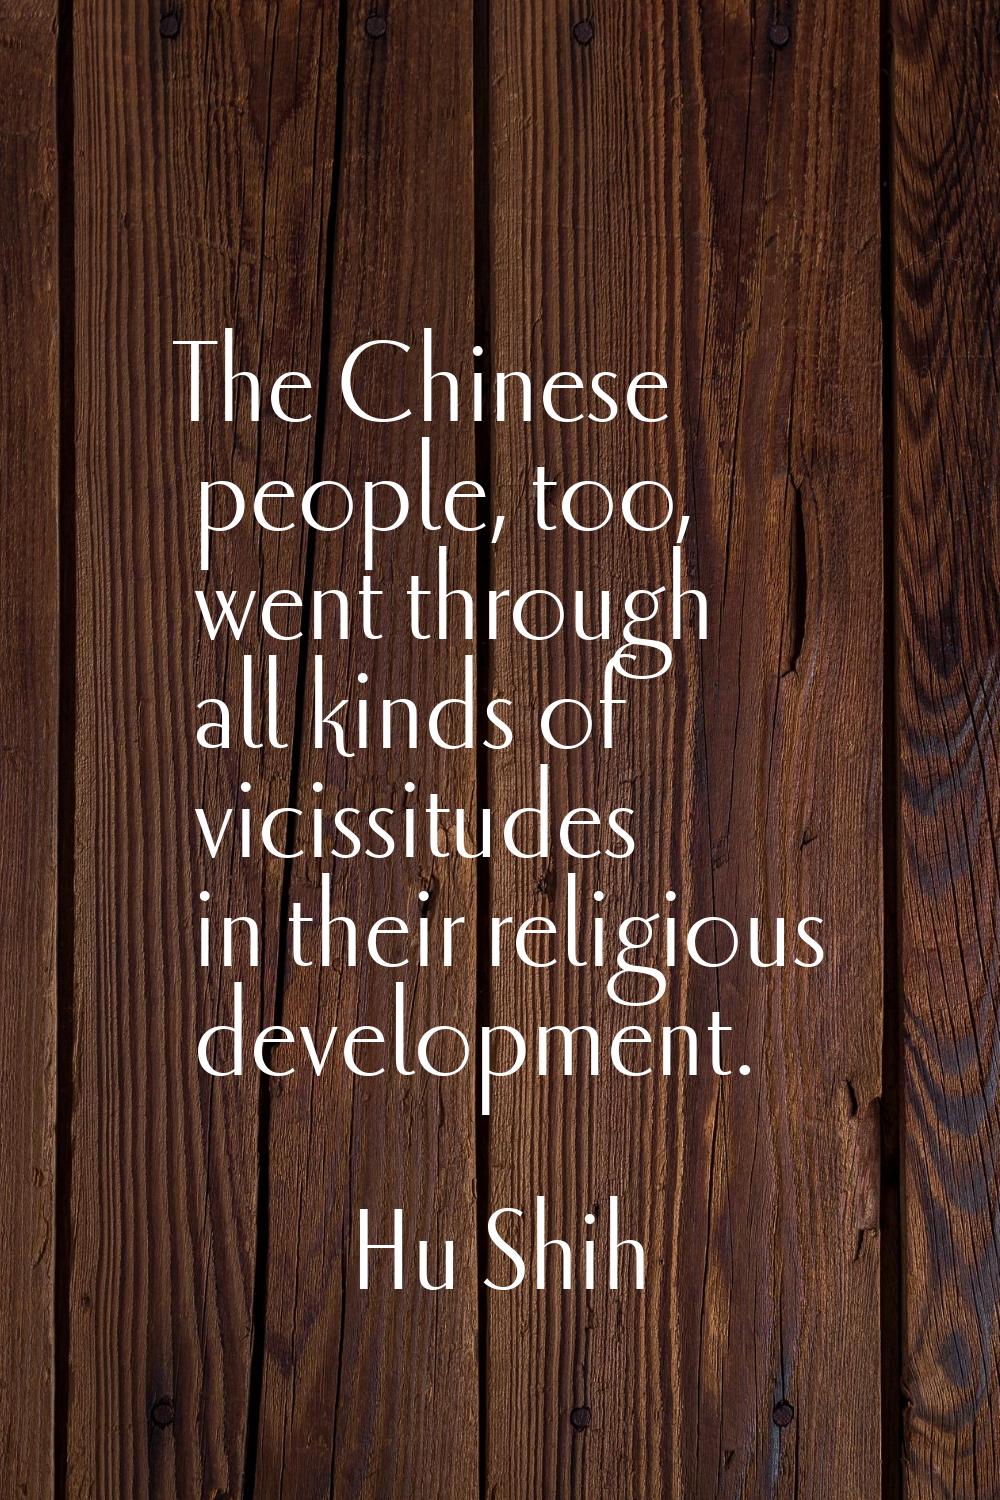 The Chinese people, too, went through all kinds of vicissitudes in their religious development.